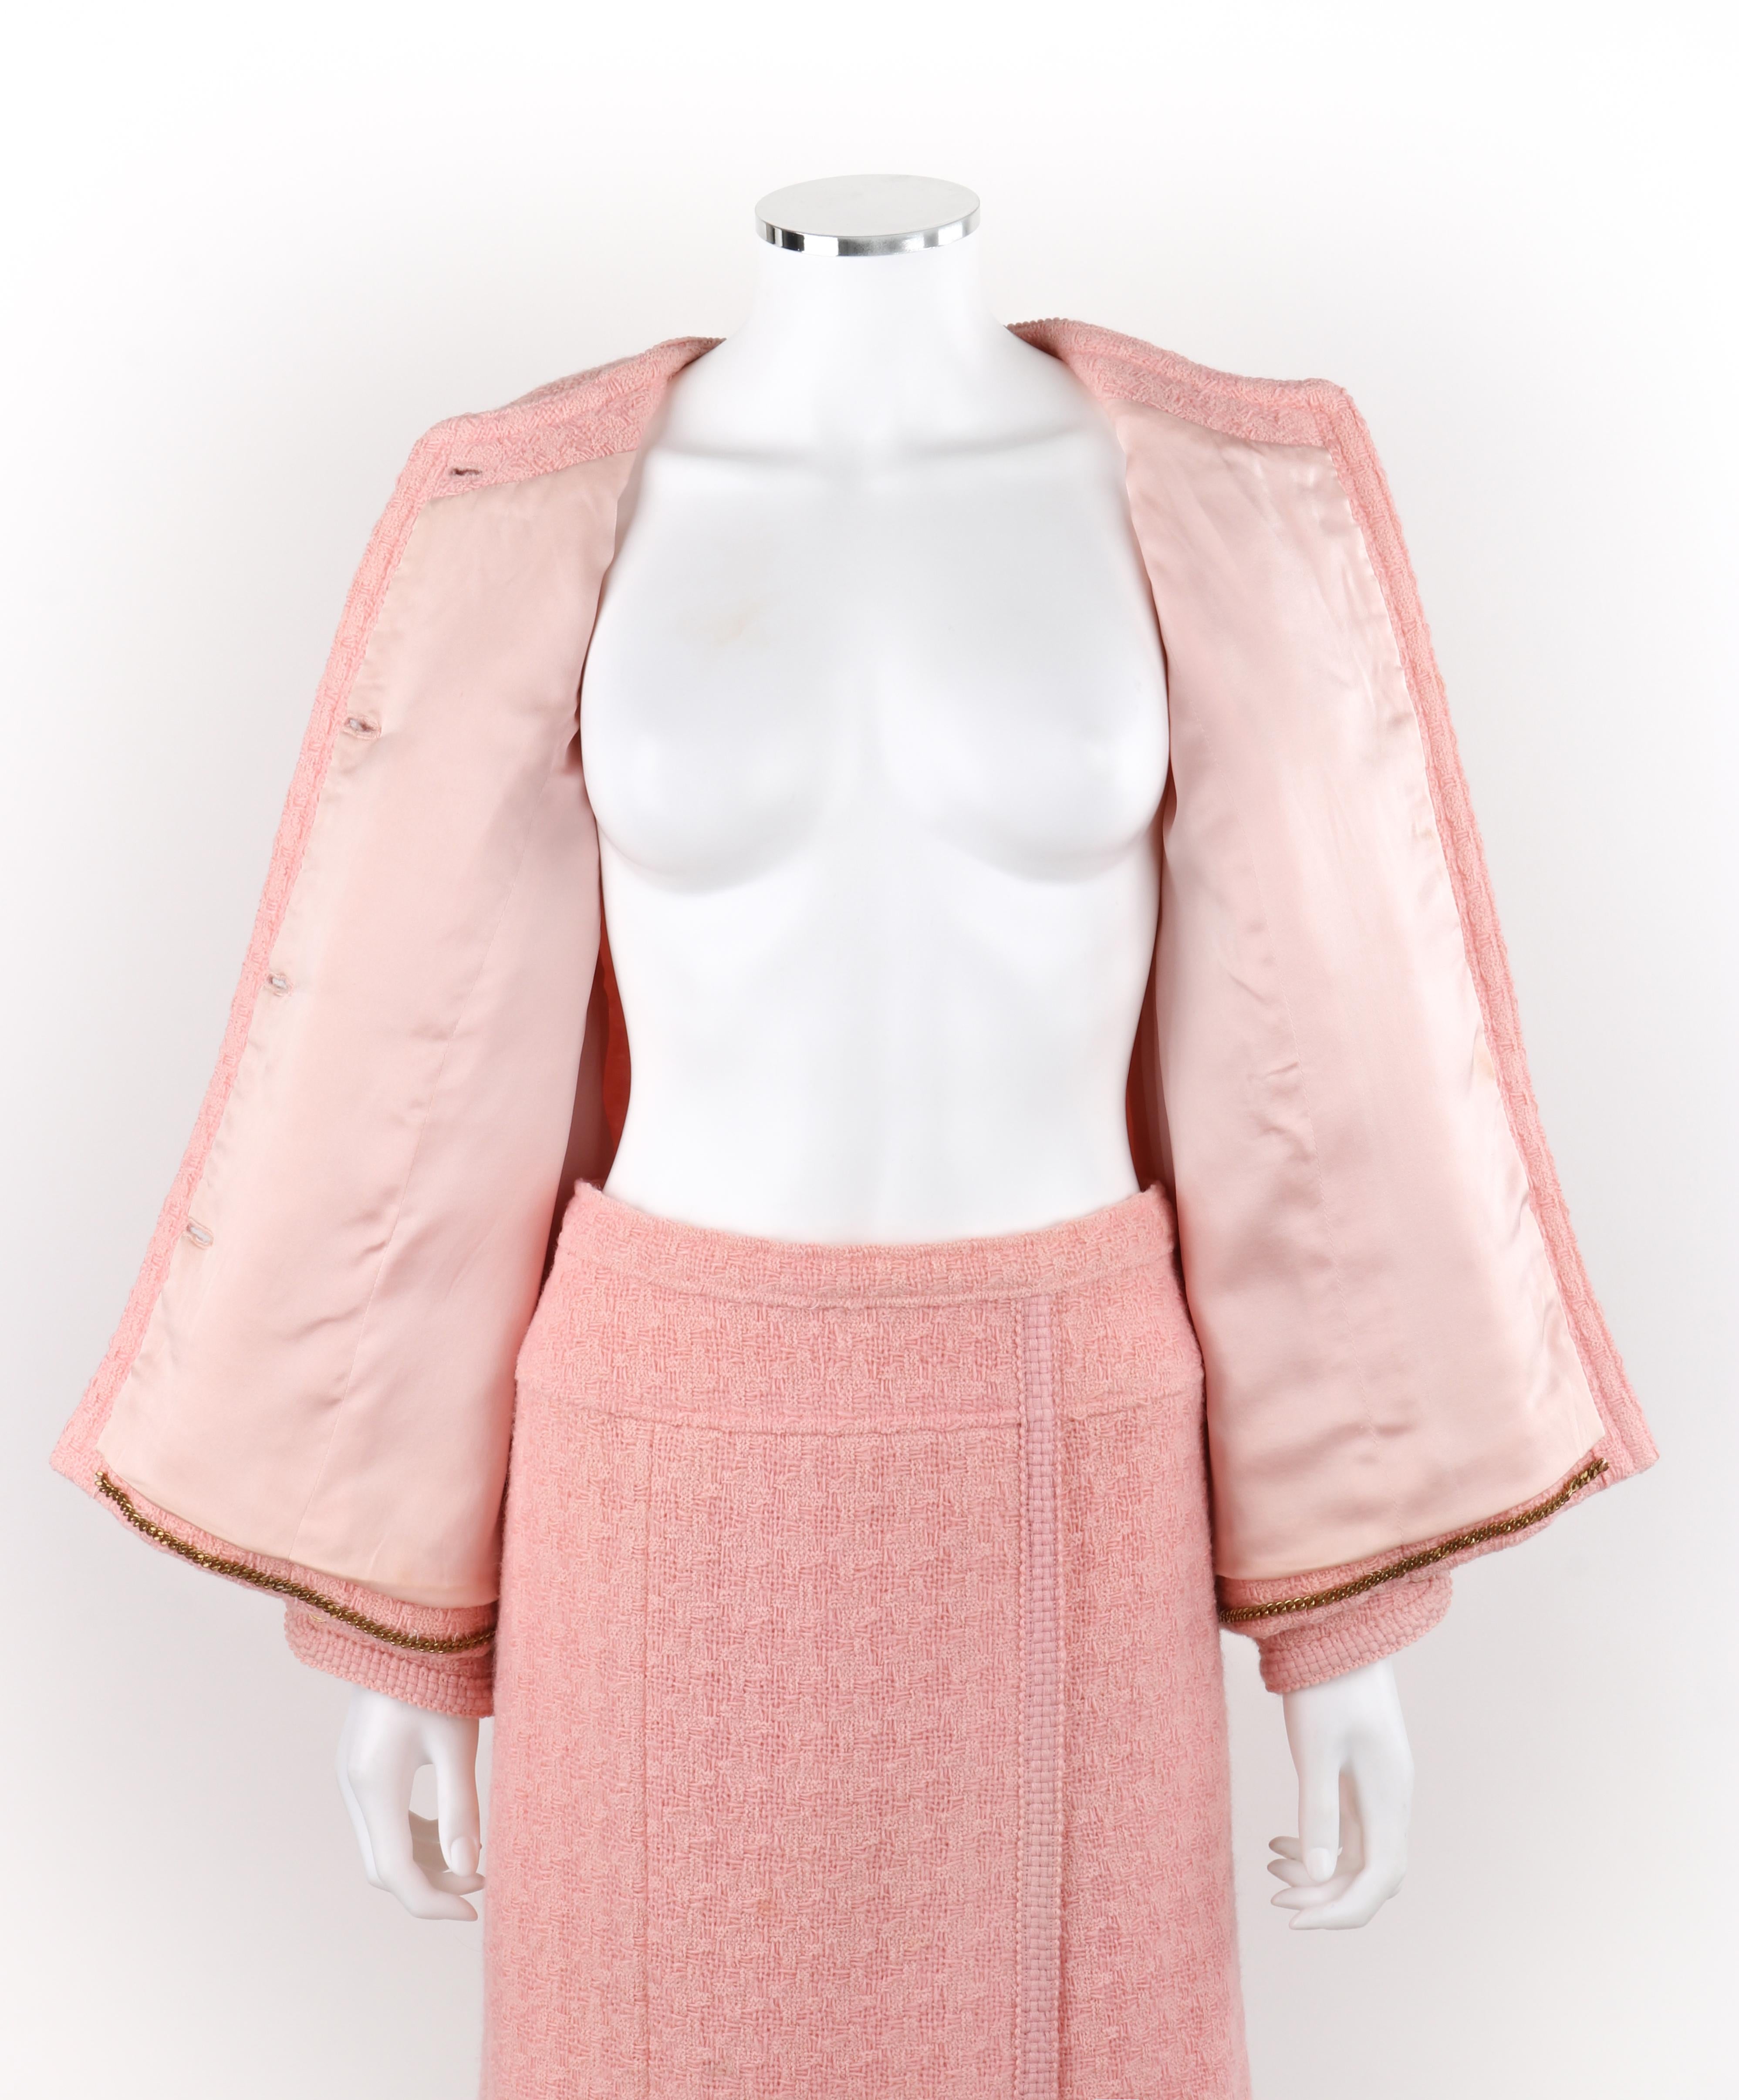 CHANEL c.1980's 2pc Pink Gold Button-Up Tweed Woven Trim Jacket Skirt Suit Set For Sale 1